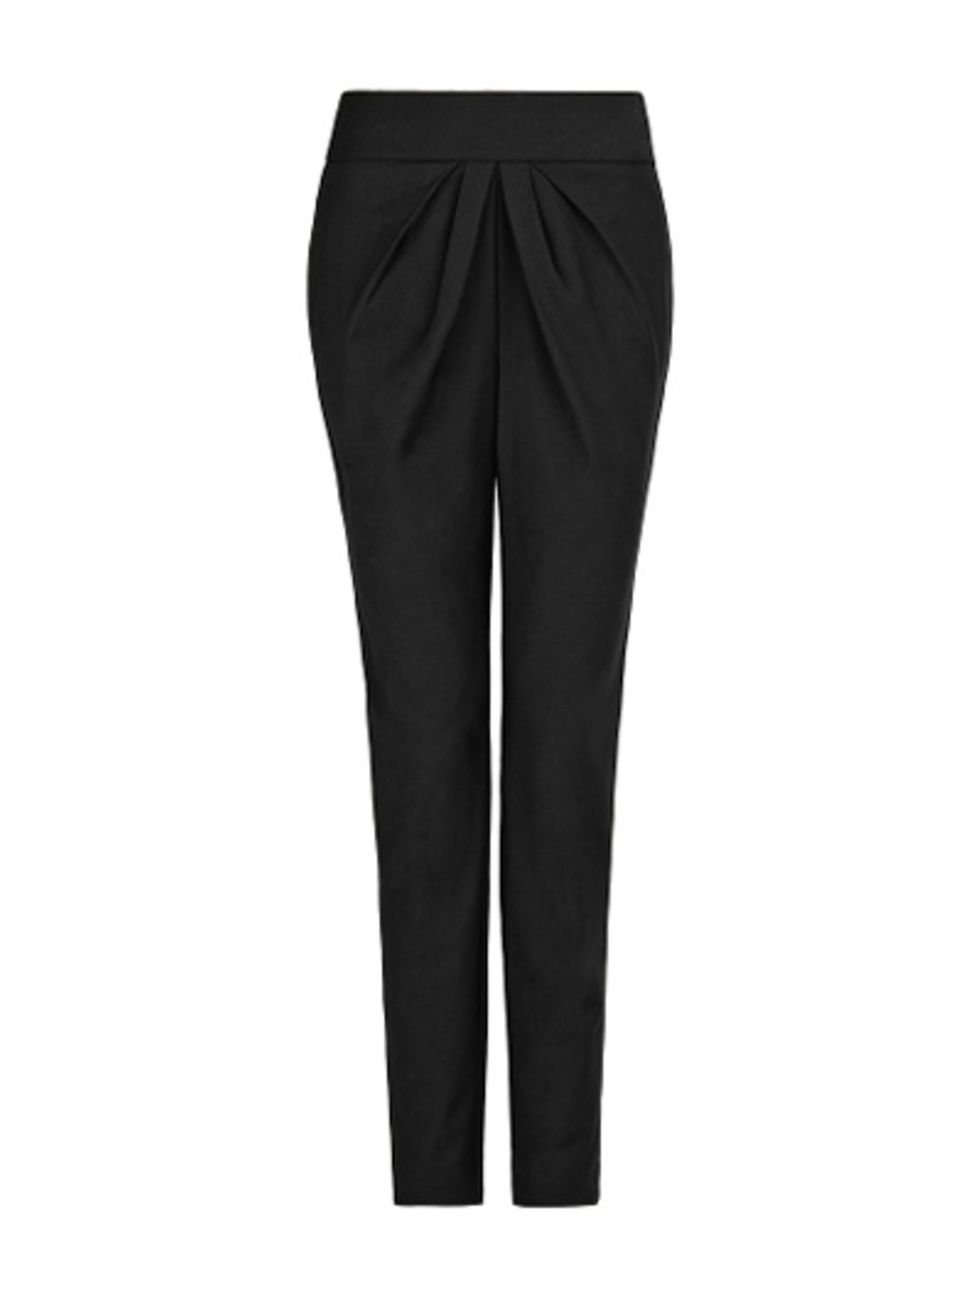 Trousers, Waist, Standing, Style, Denim, Pocket, Active pants, Black-and-white, Tights, Hip, 